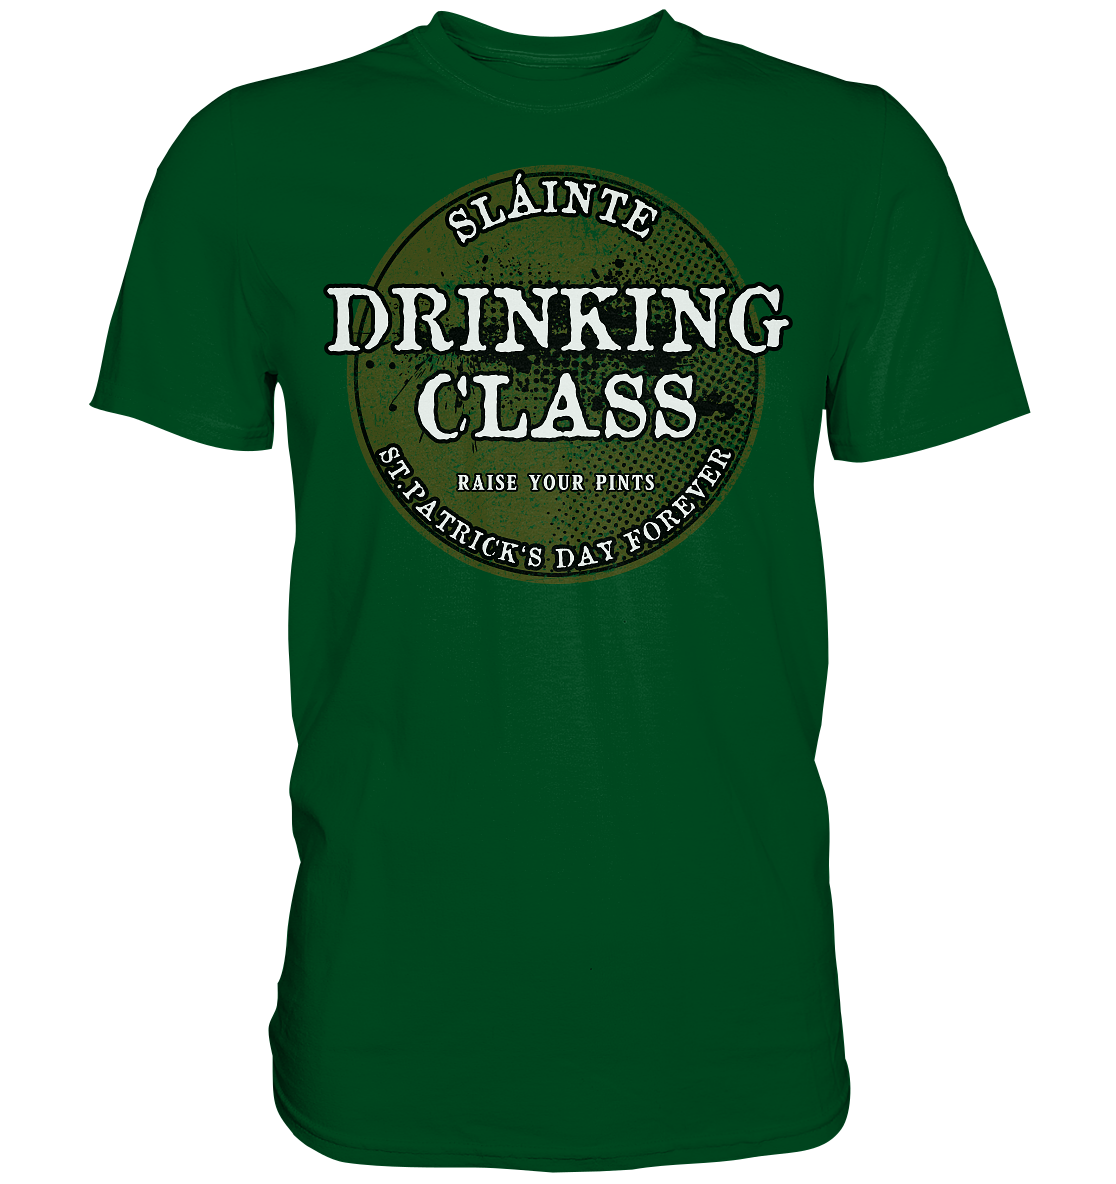 Drinking Class "St.Patrick's Day Forever" - Premium Shirt